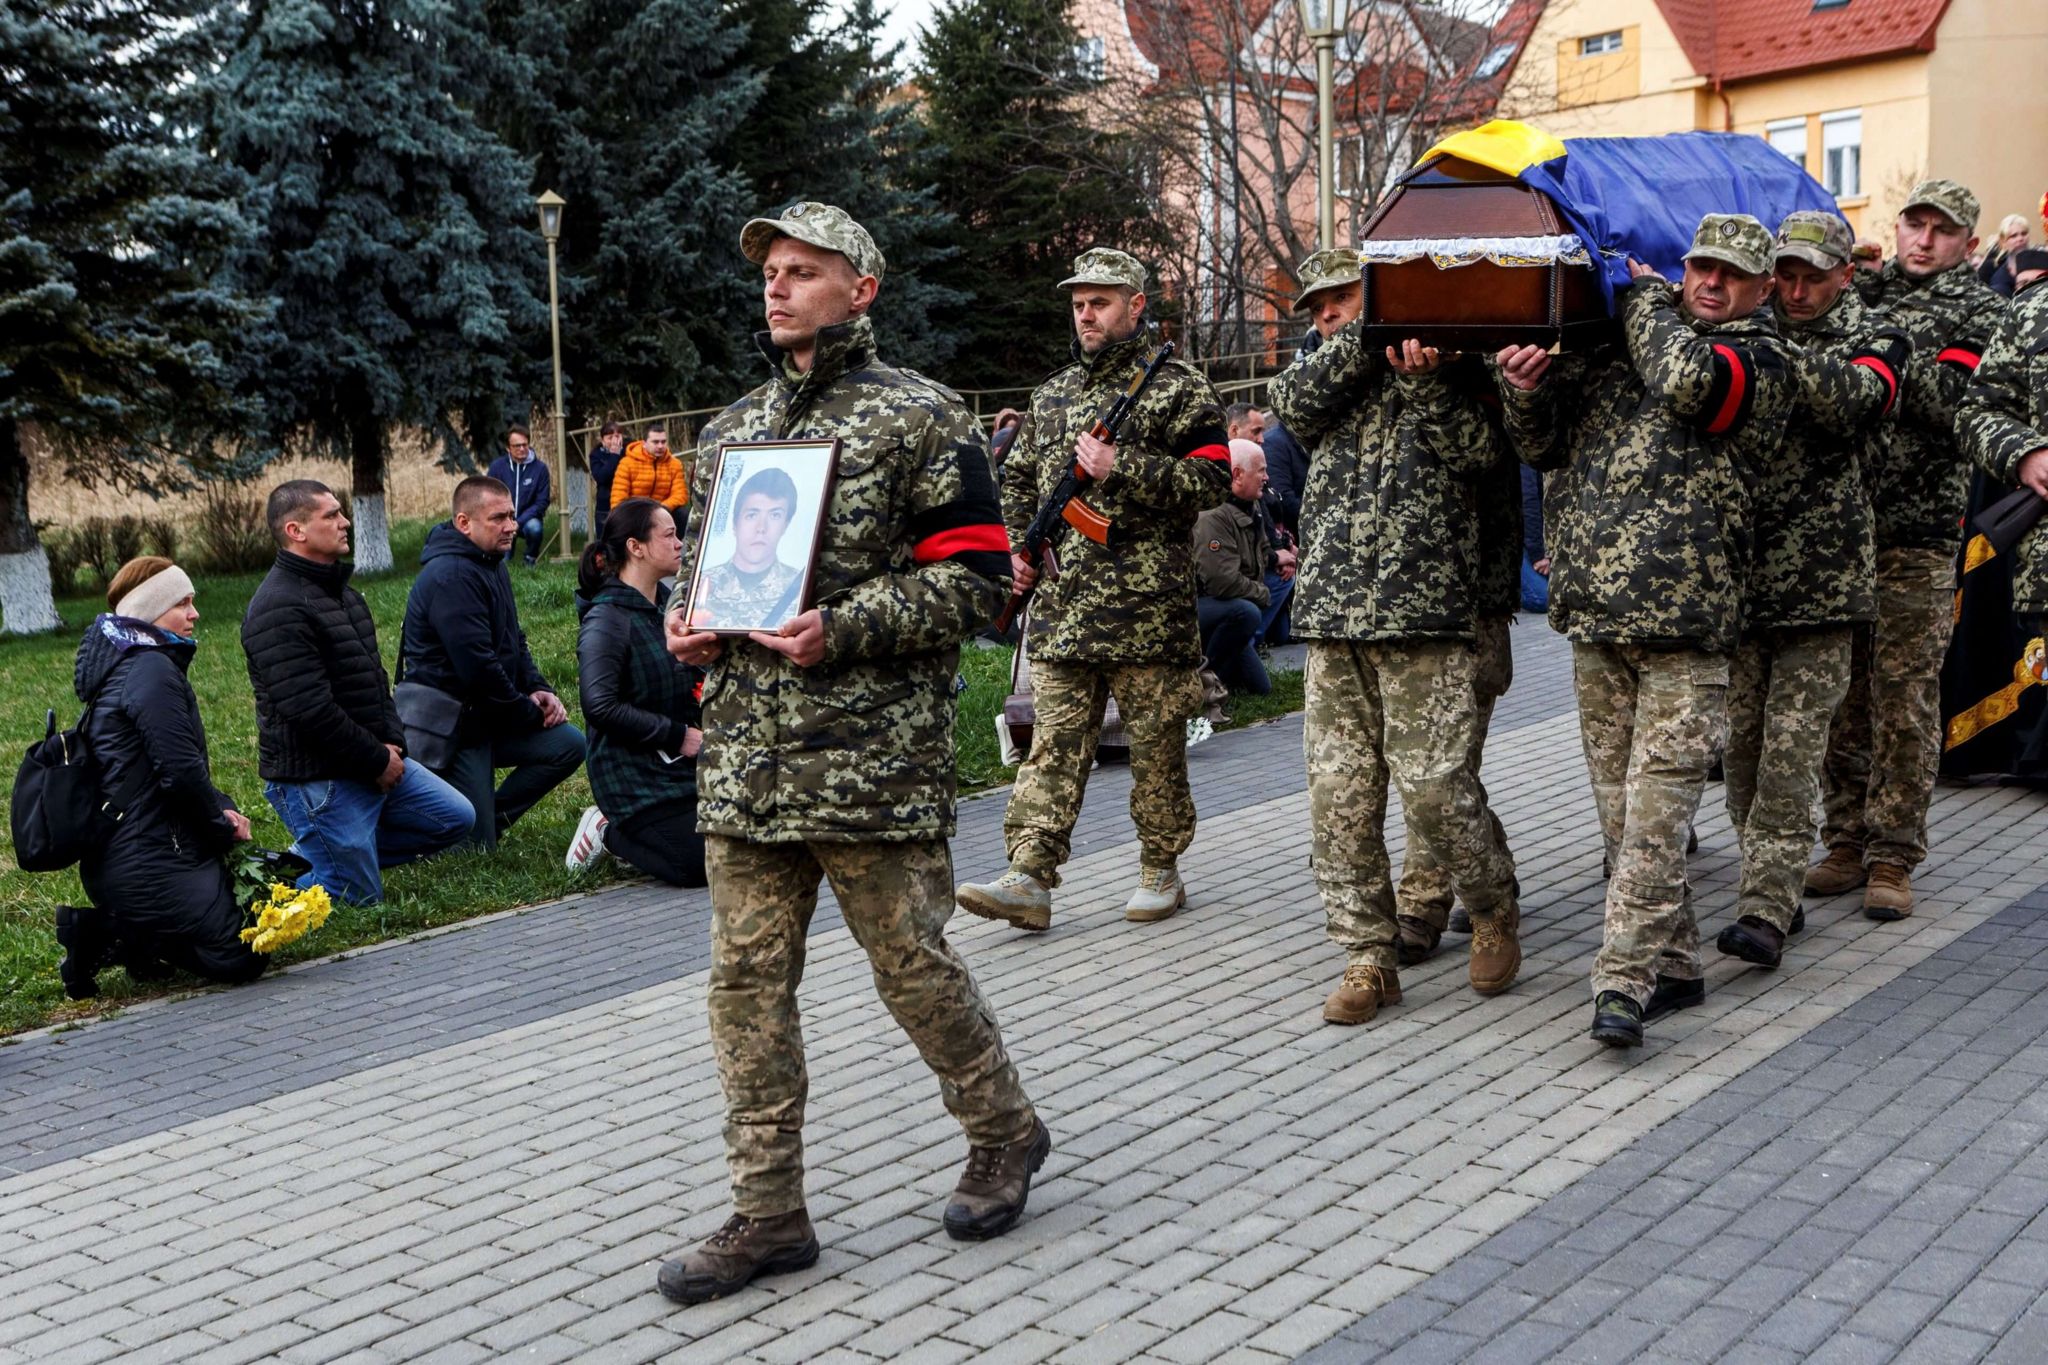 Photo of Ukrainian soldiers carrying the coffin of their fallen colleague, Sviatoslav Soyko, during his funeral in Uzhhorod, Ukraine. The young man died during the conflict with Russia.